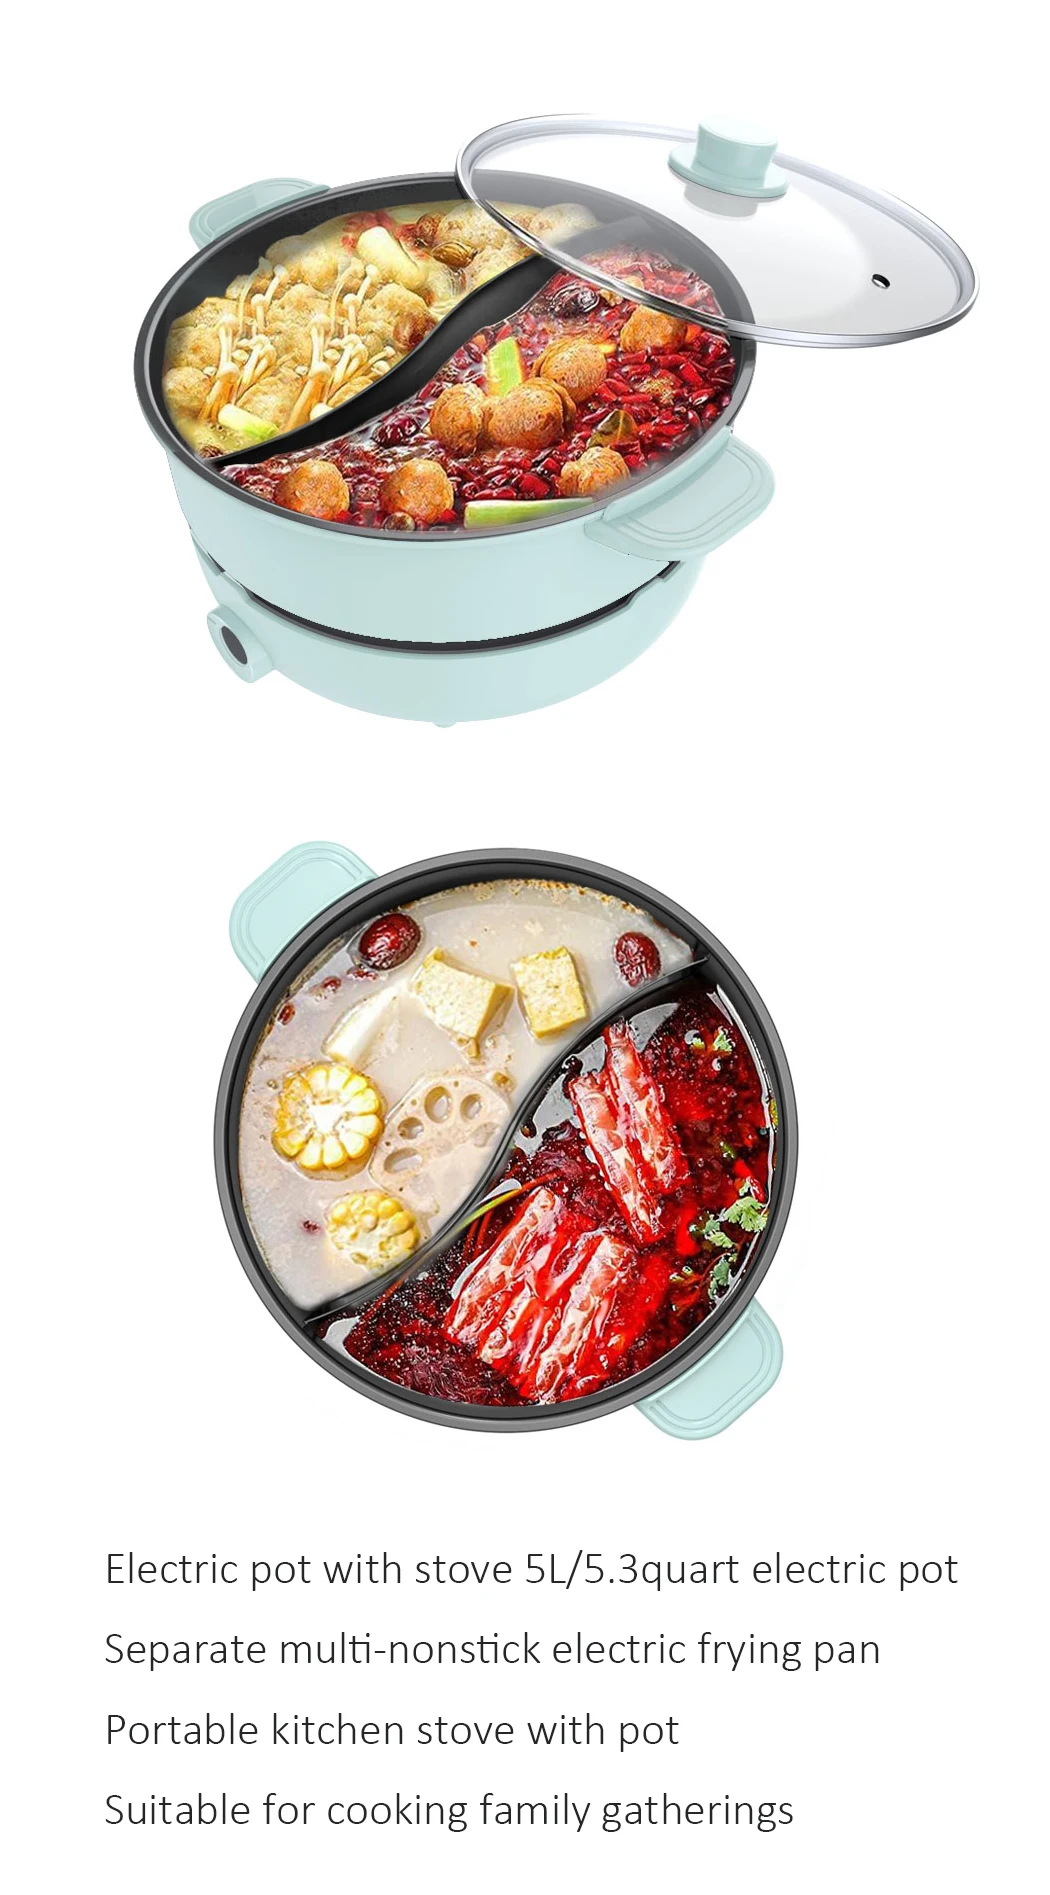 Electric homemade Hot pot recommendations for hot pot? With divider :  r/dinner